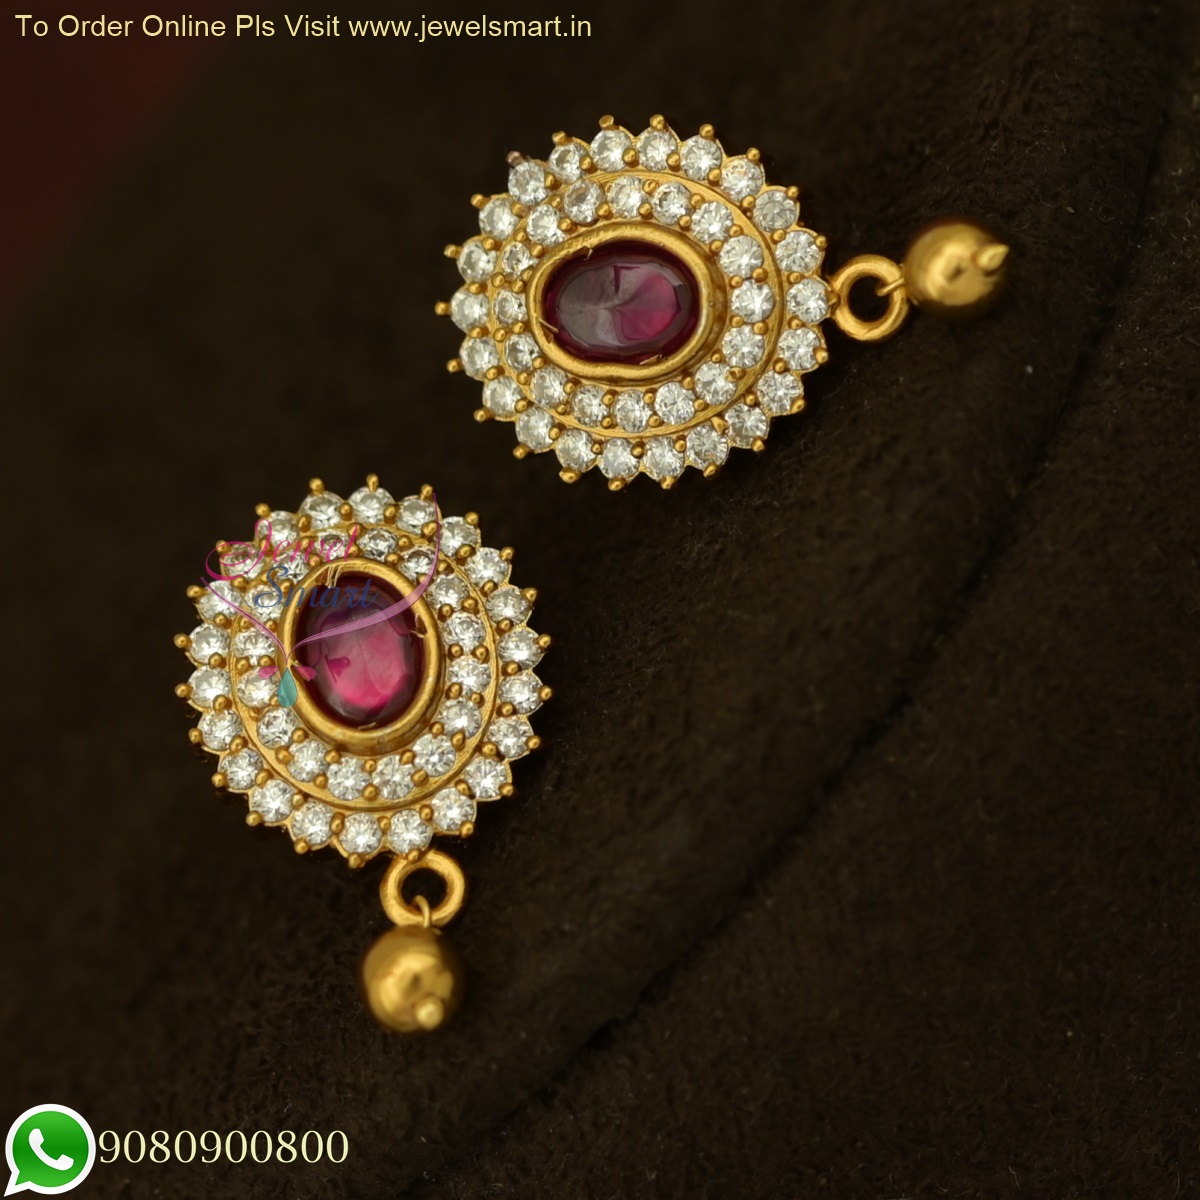 Gold Plated 92.5 Silver CZ Jhumka with Emerald Stone Earing - Mahaveer  Pearls - The Jewellery Studio